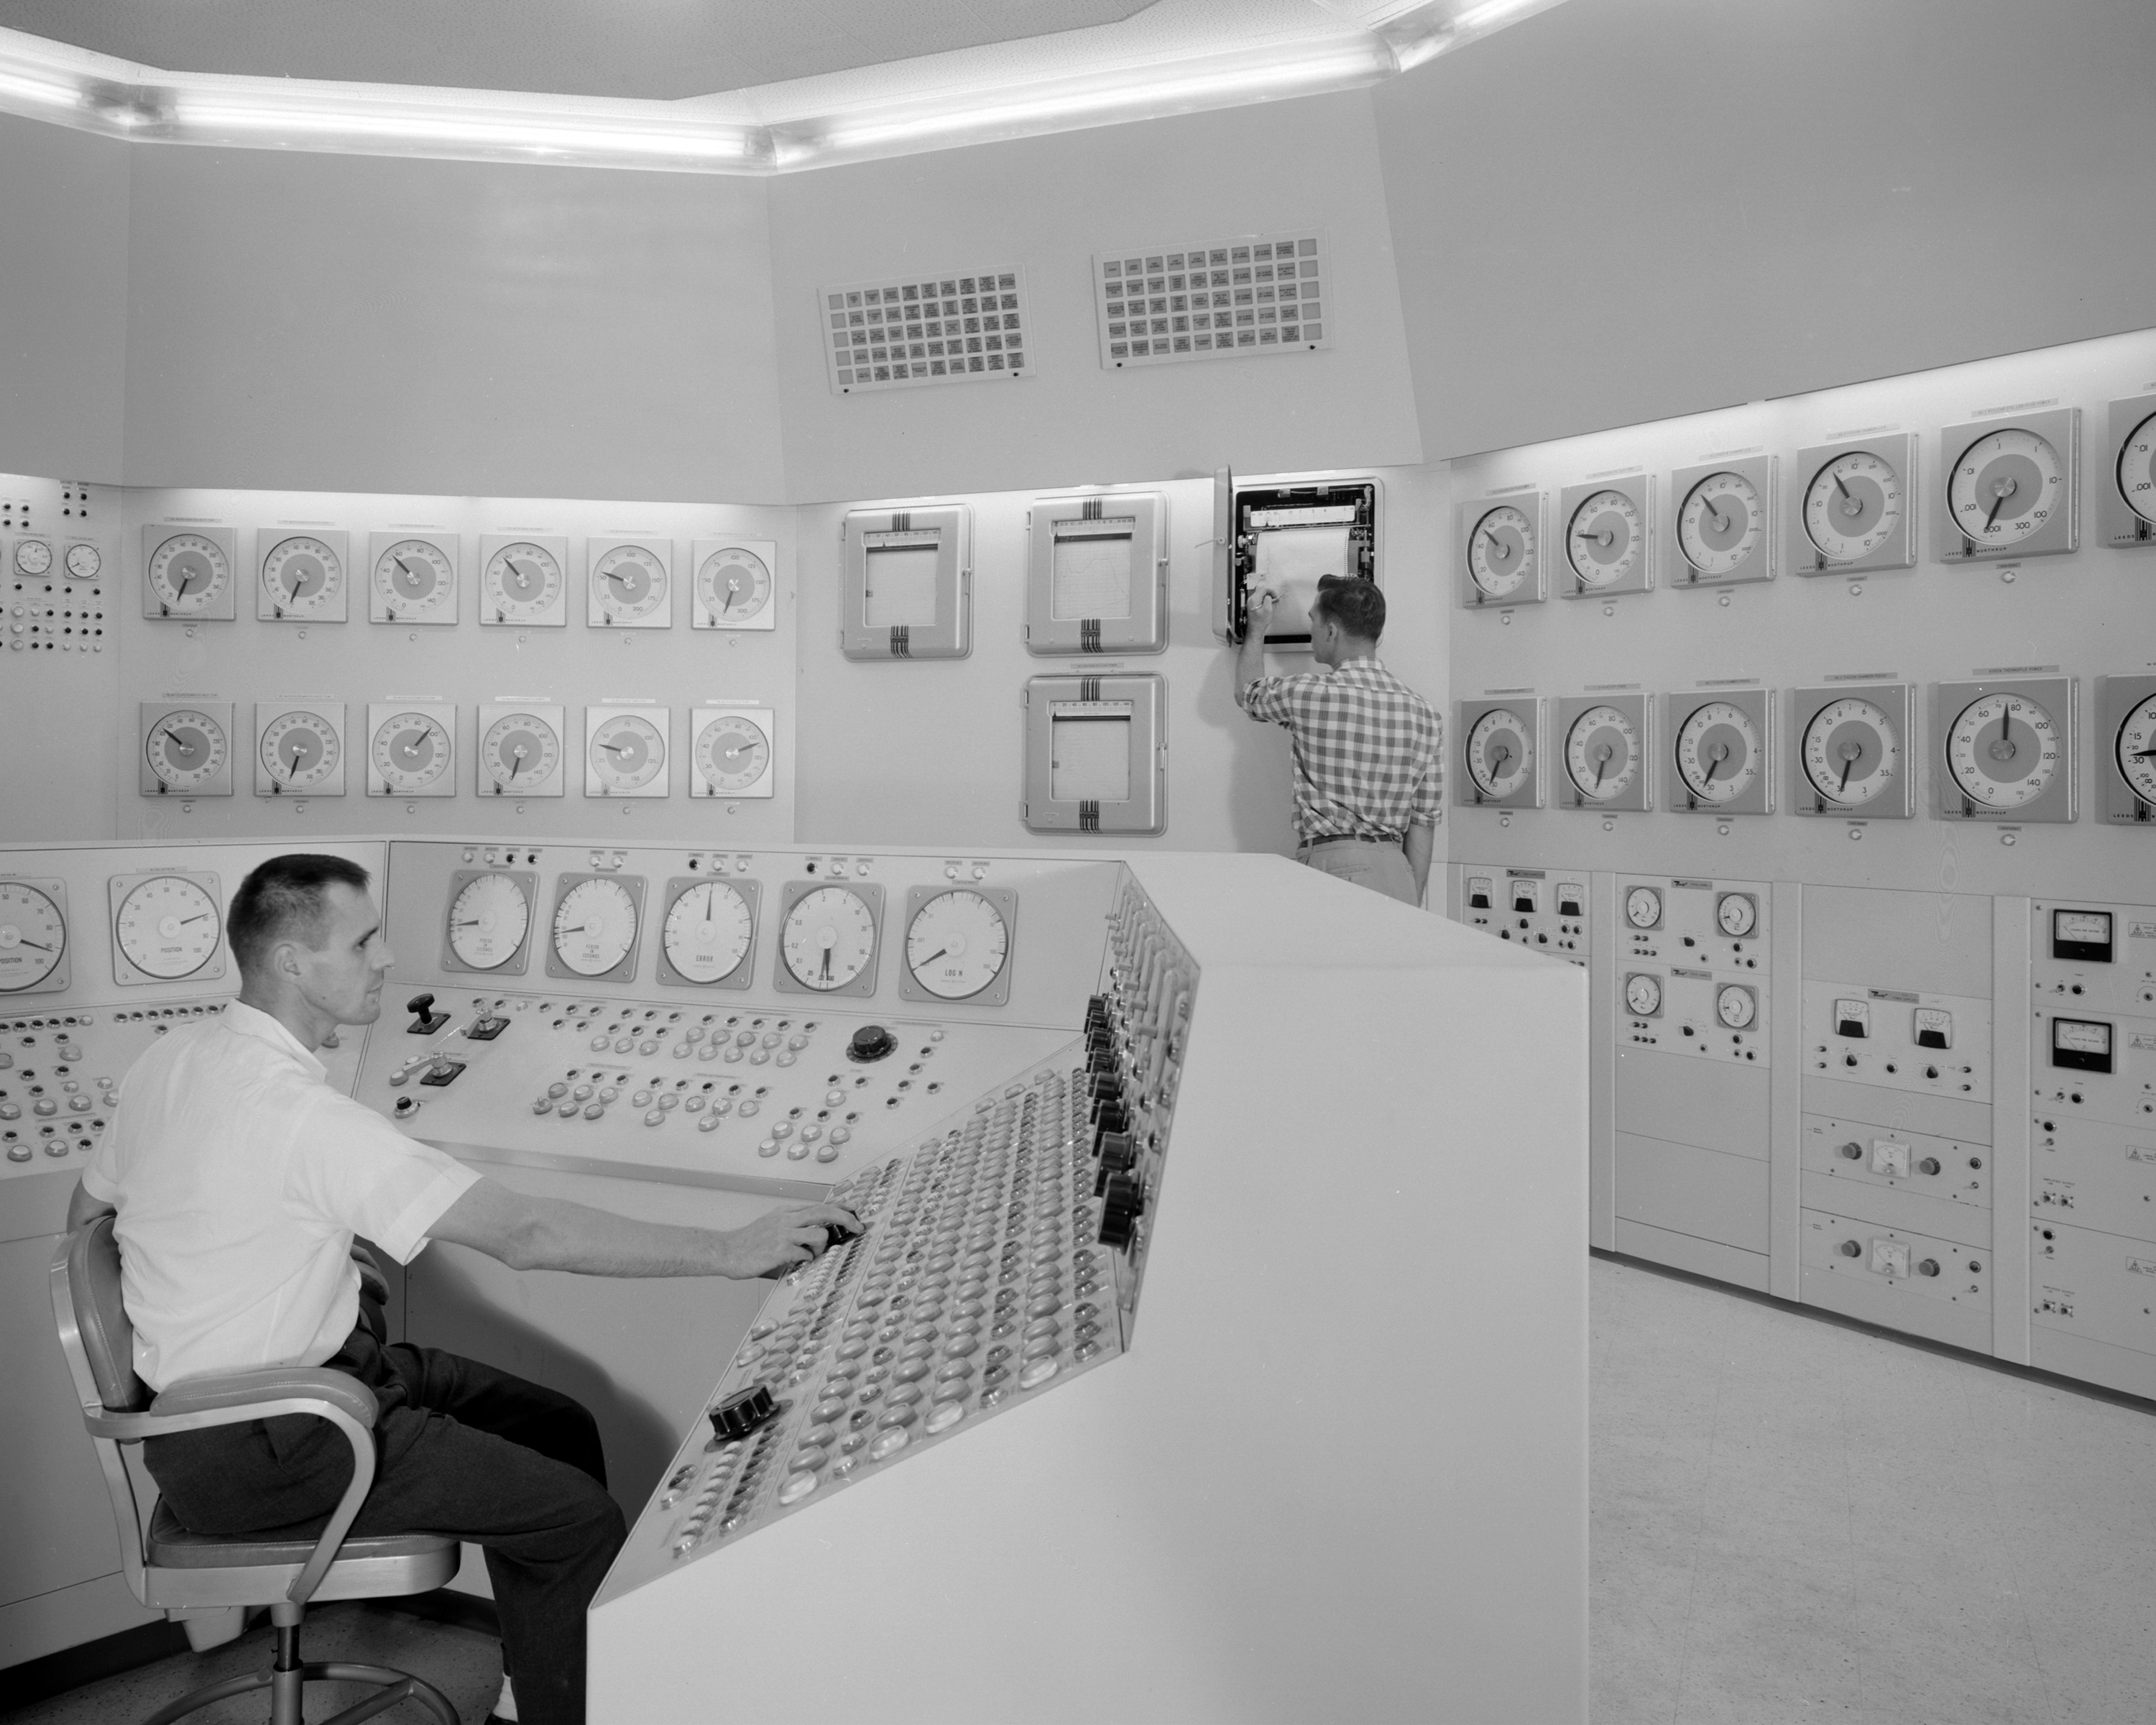 Bill Fecych and Don Johnson in control room in 1959. (9465040235)